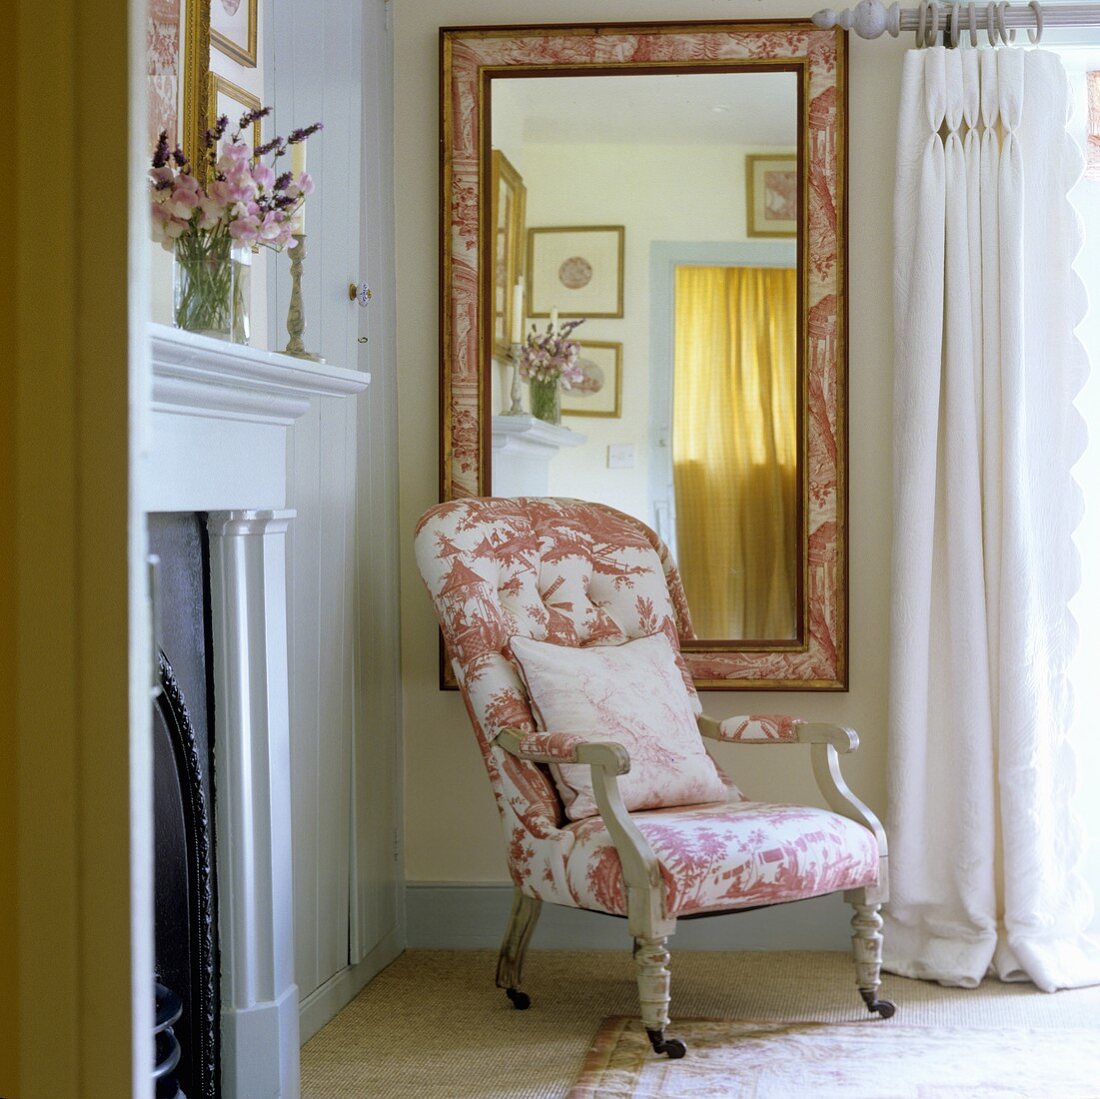 A patterned upholstered armchair in front of a mirror in a bedroom in a country house